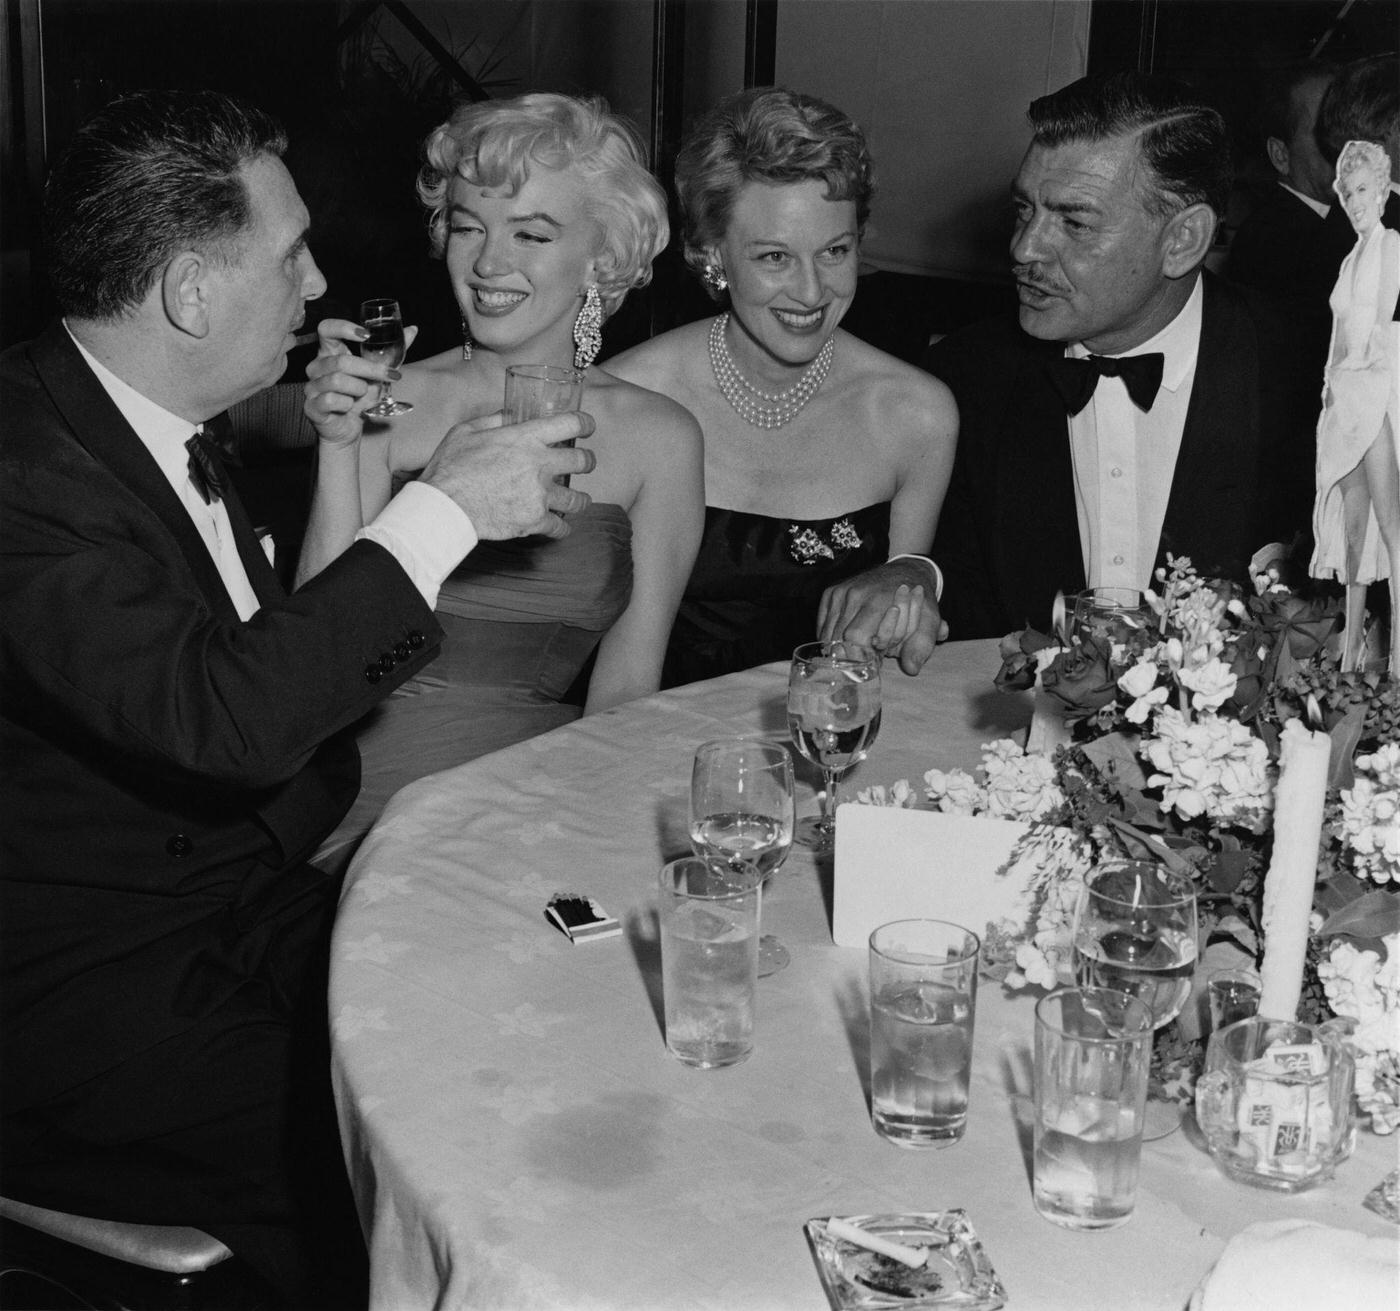 Marilyn Monroe with actor Clark Gable, producer Charles K Feldman and actress Jean Howard at the wrap party for the filming of "The Seven Year Itch"